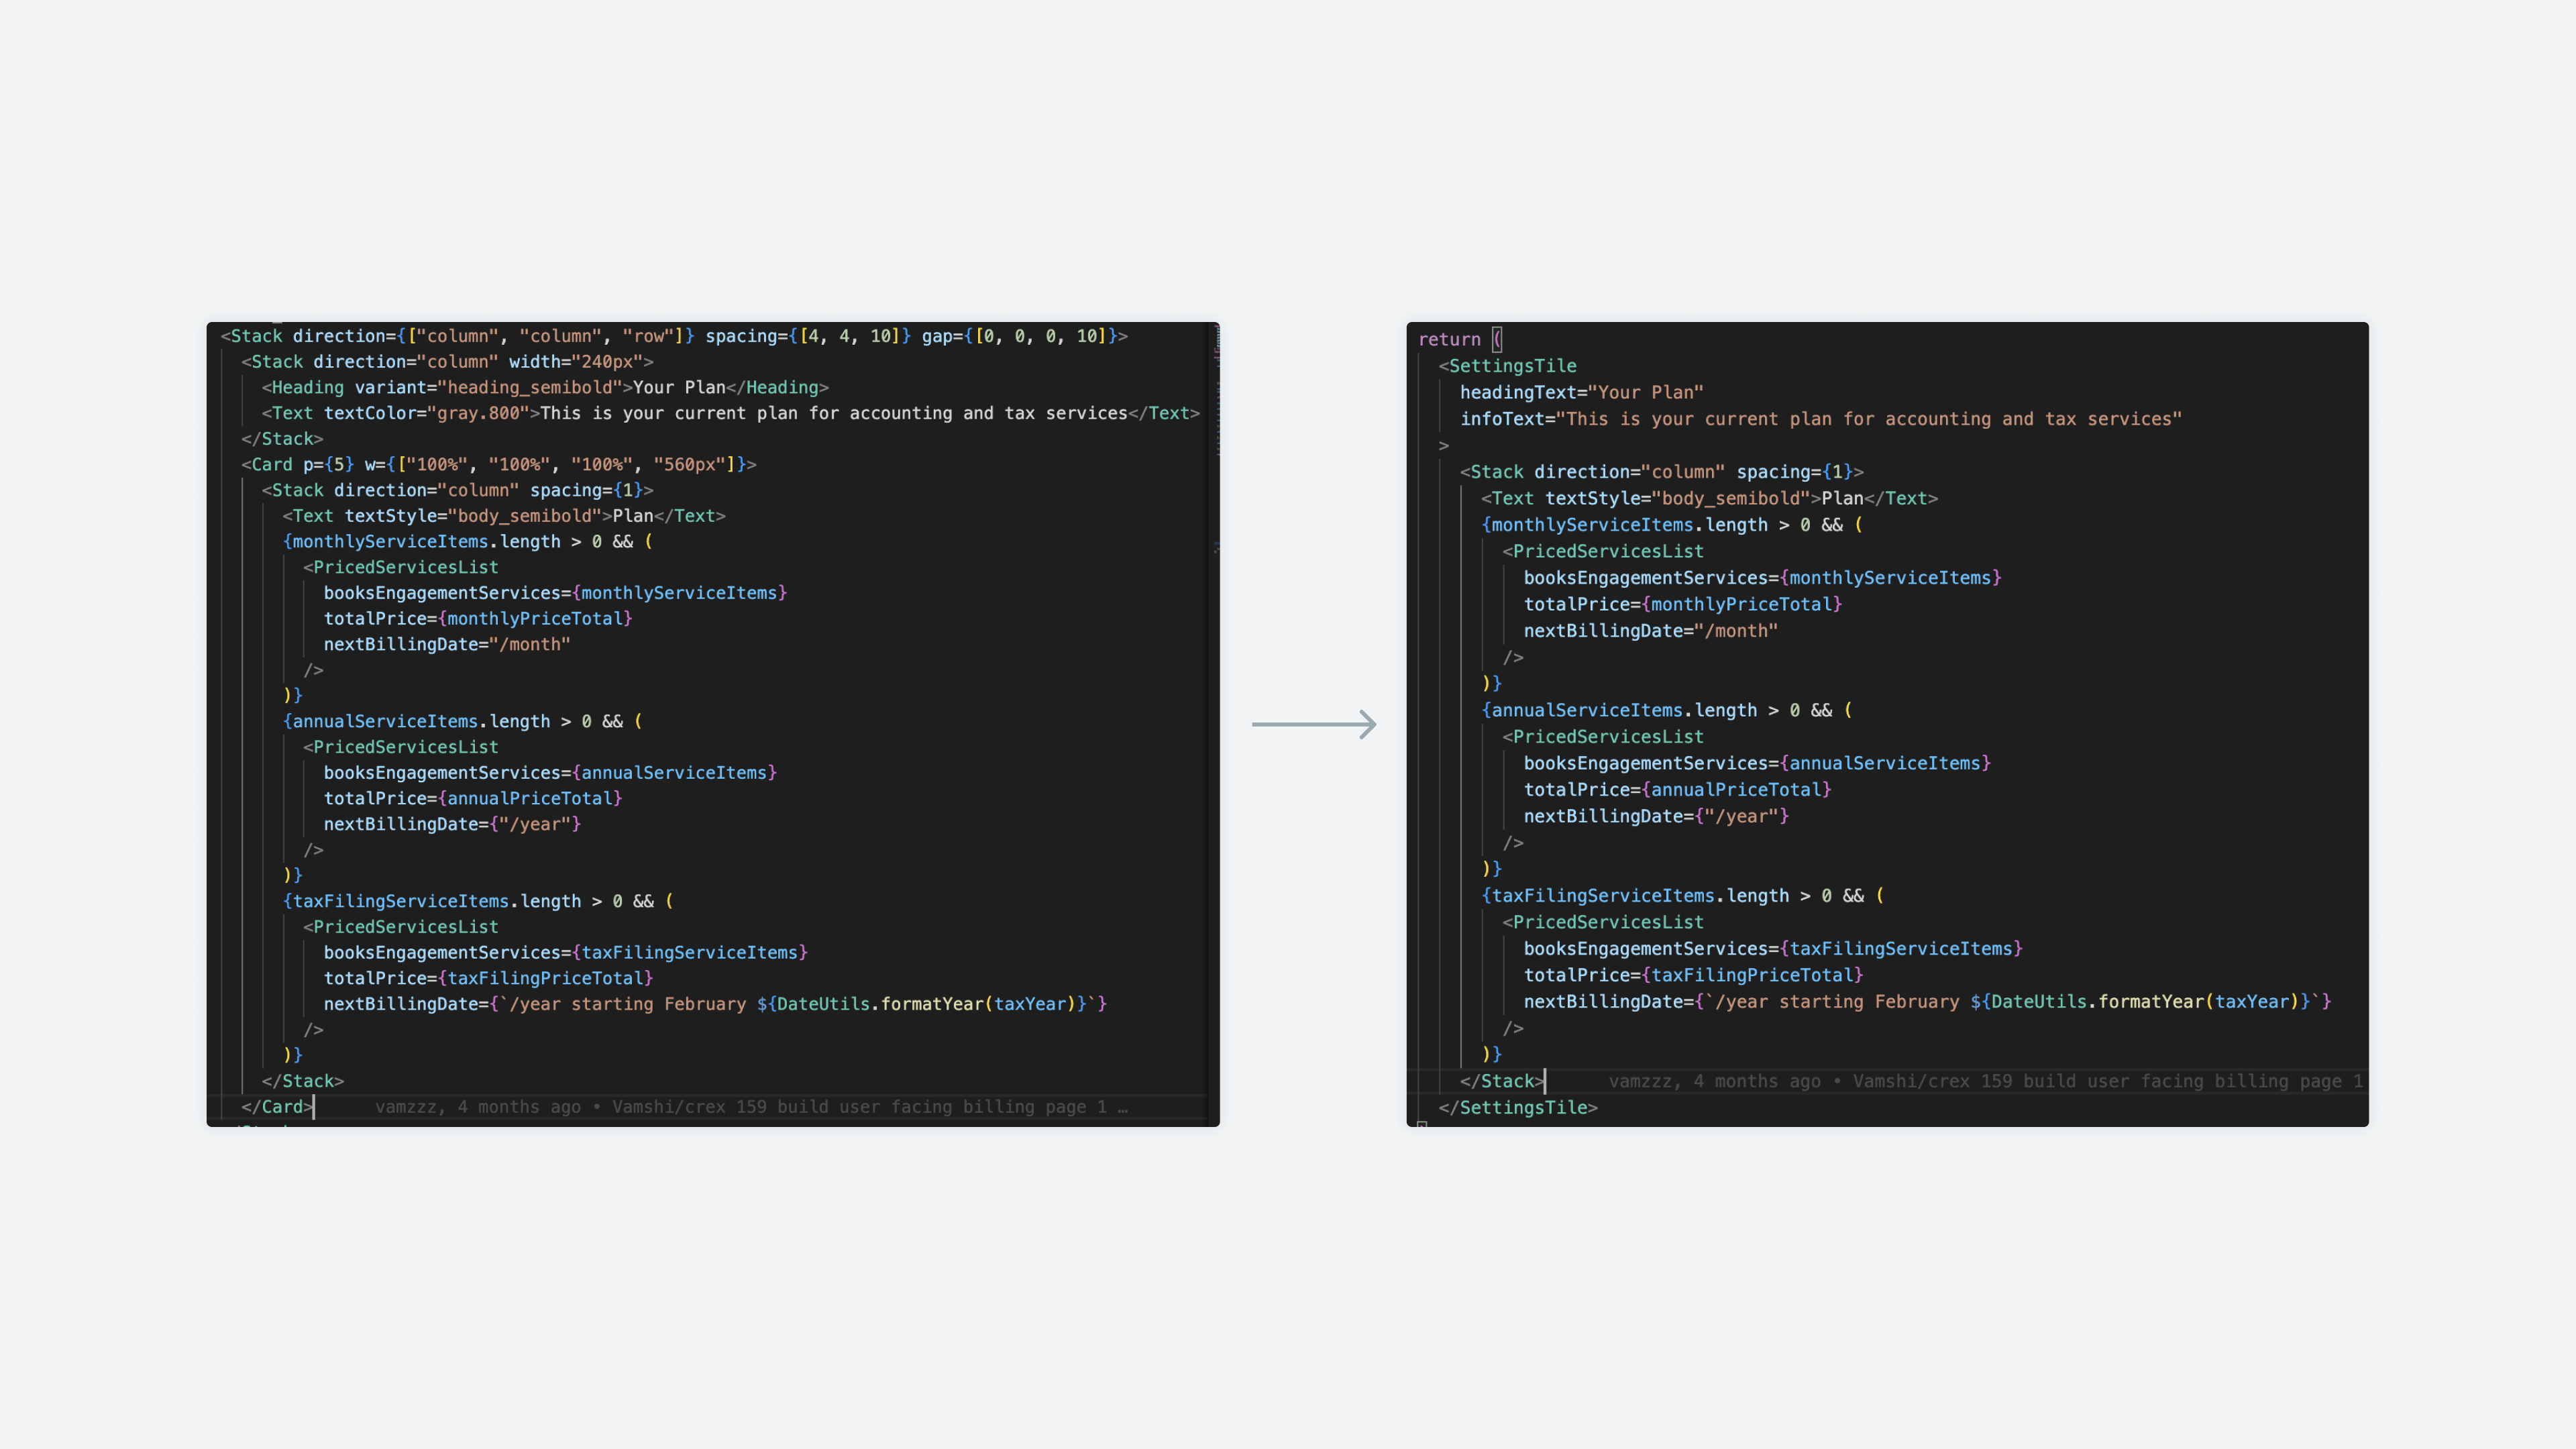 Two screenshots. First screenshot shows a longer block of code that has multiple repetitive lines. Second screenshot shows the same block of code, but it’s cleaned up and much smaller.